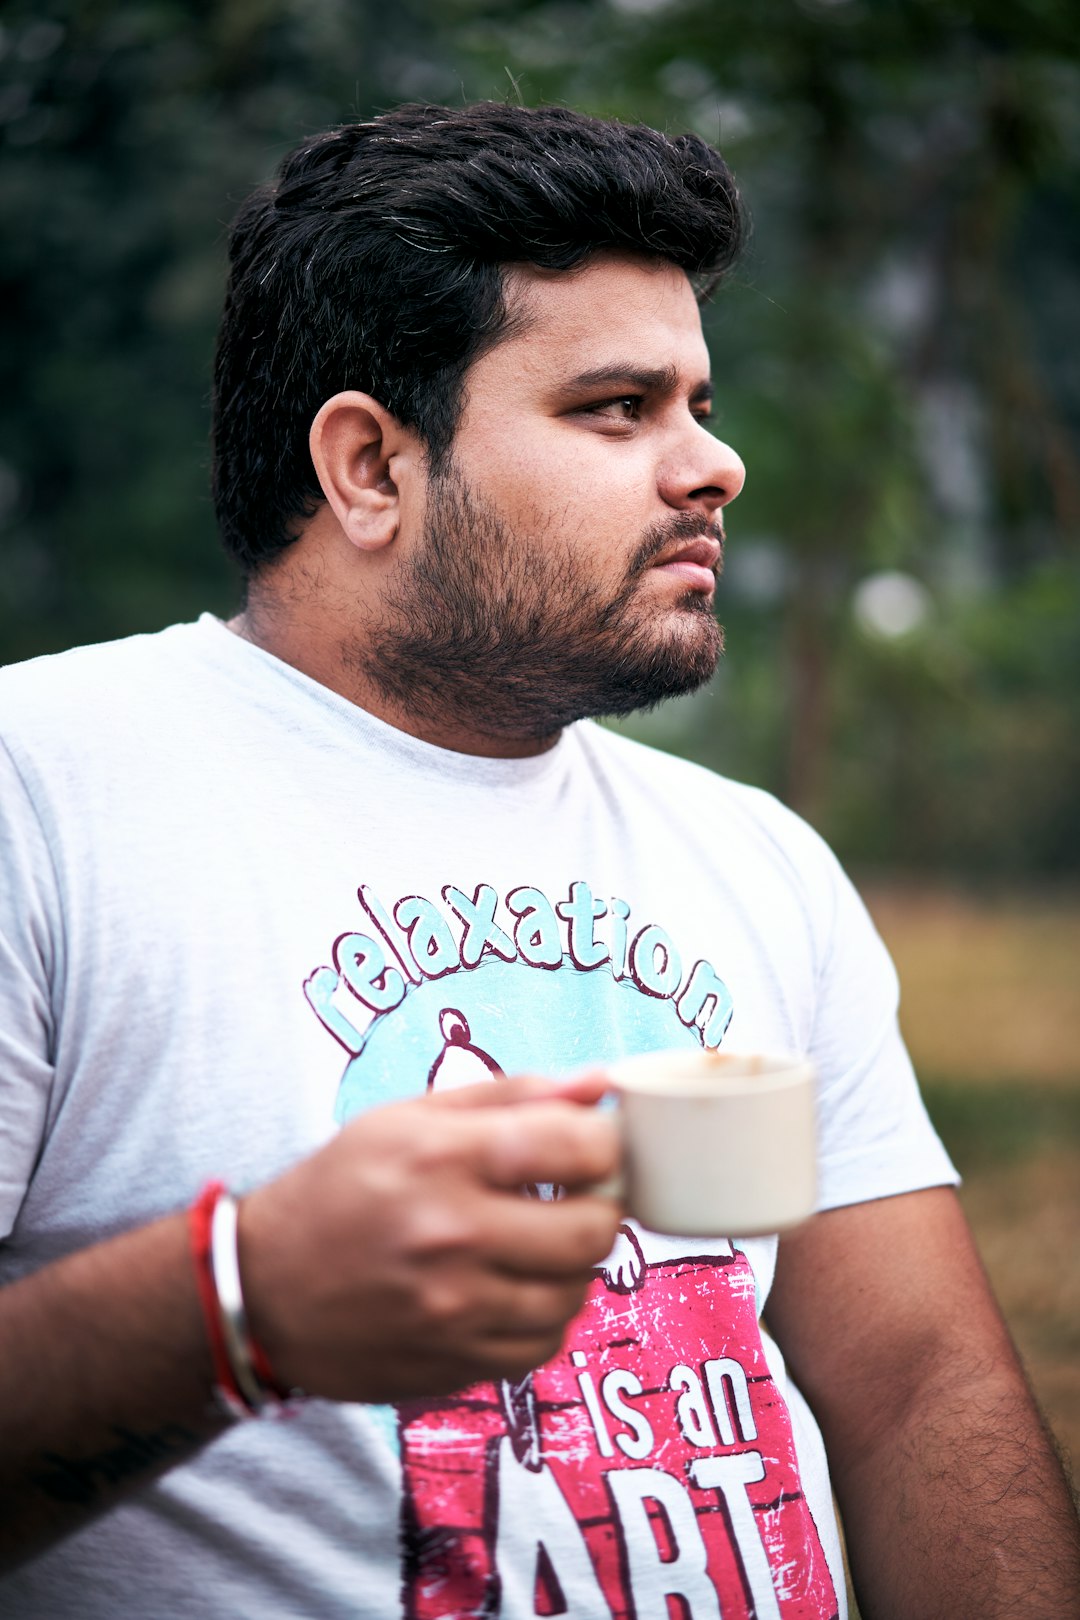 selective focus photo of man holding teacup